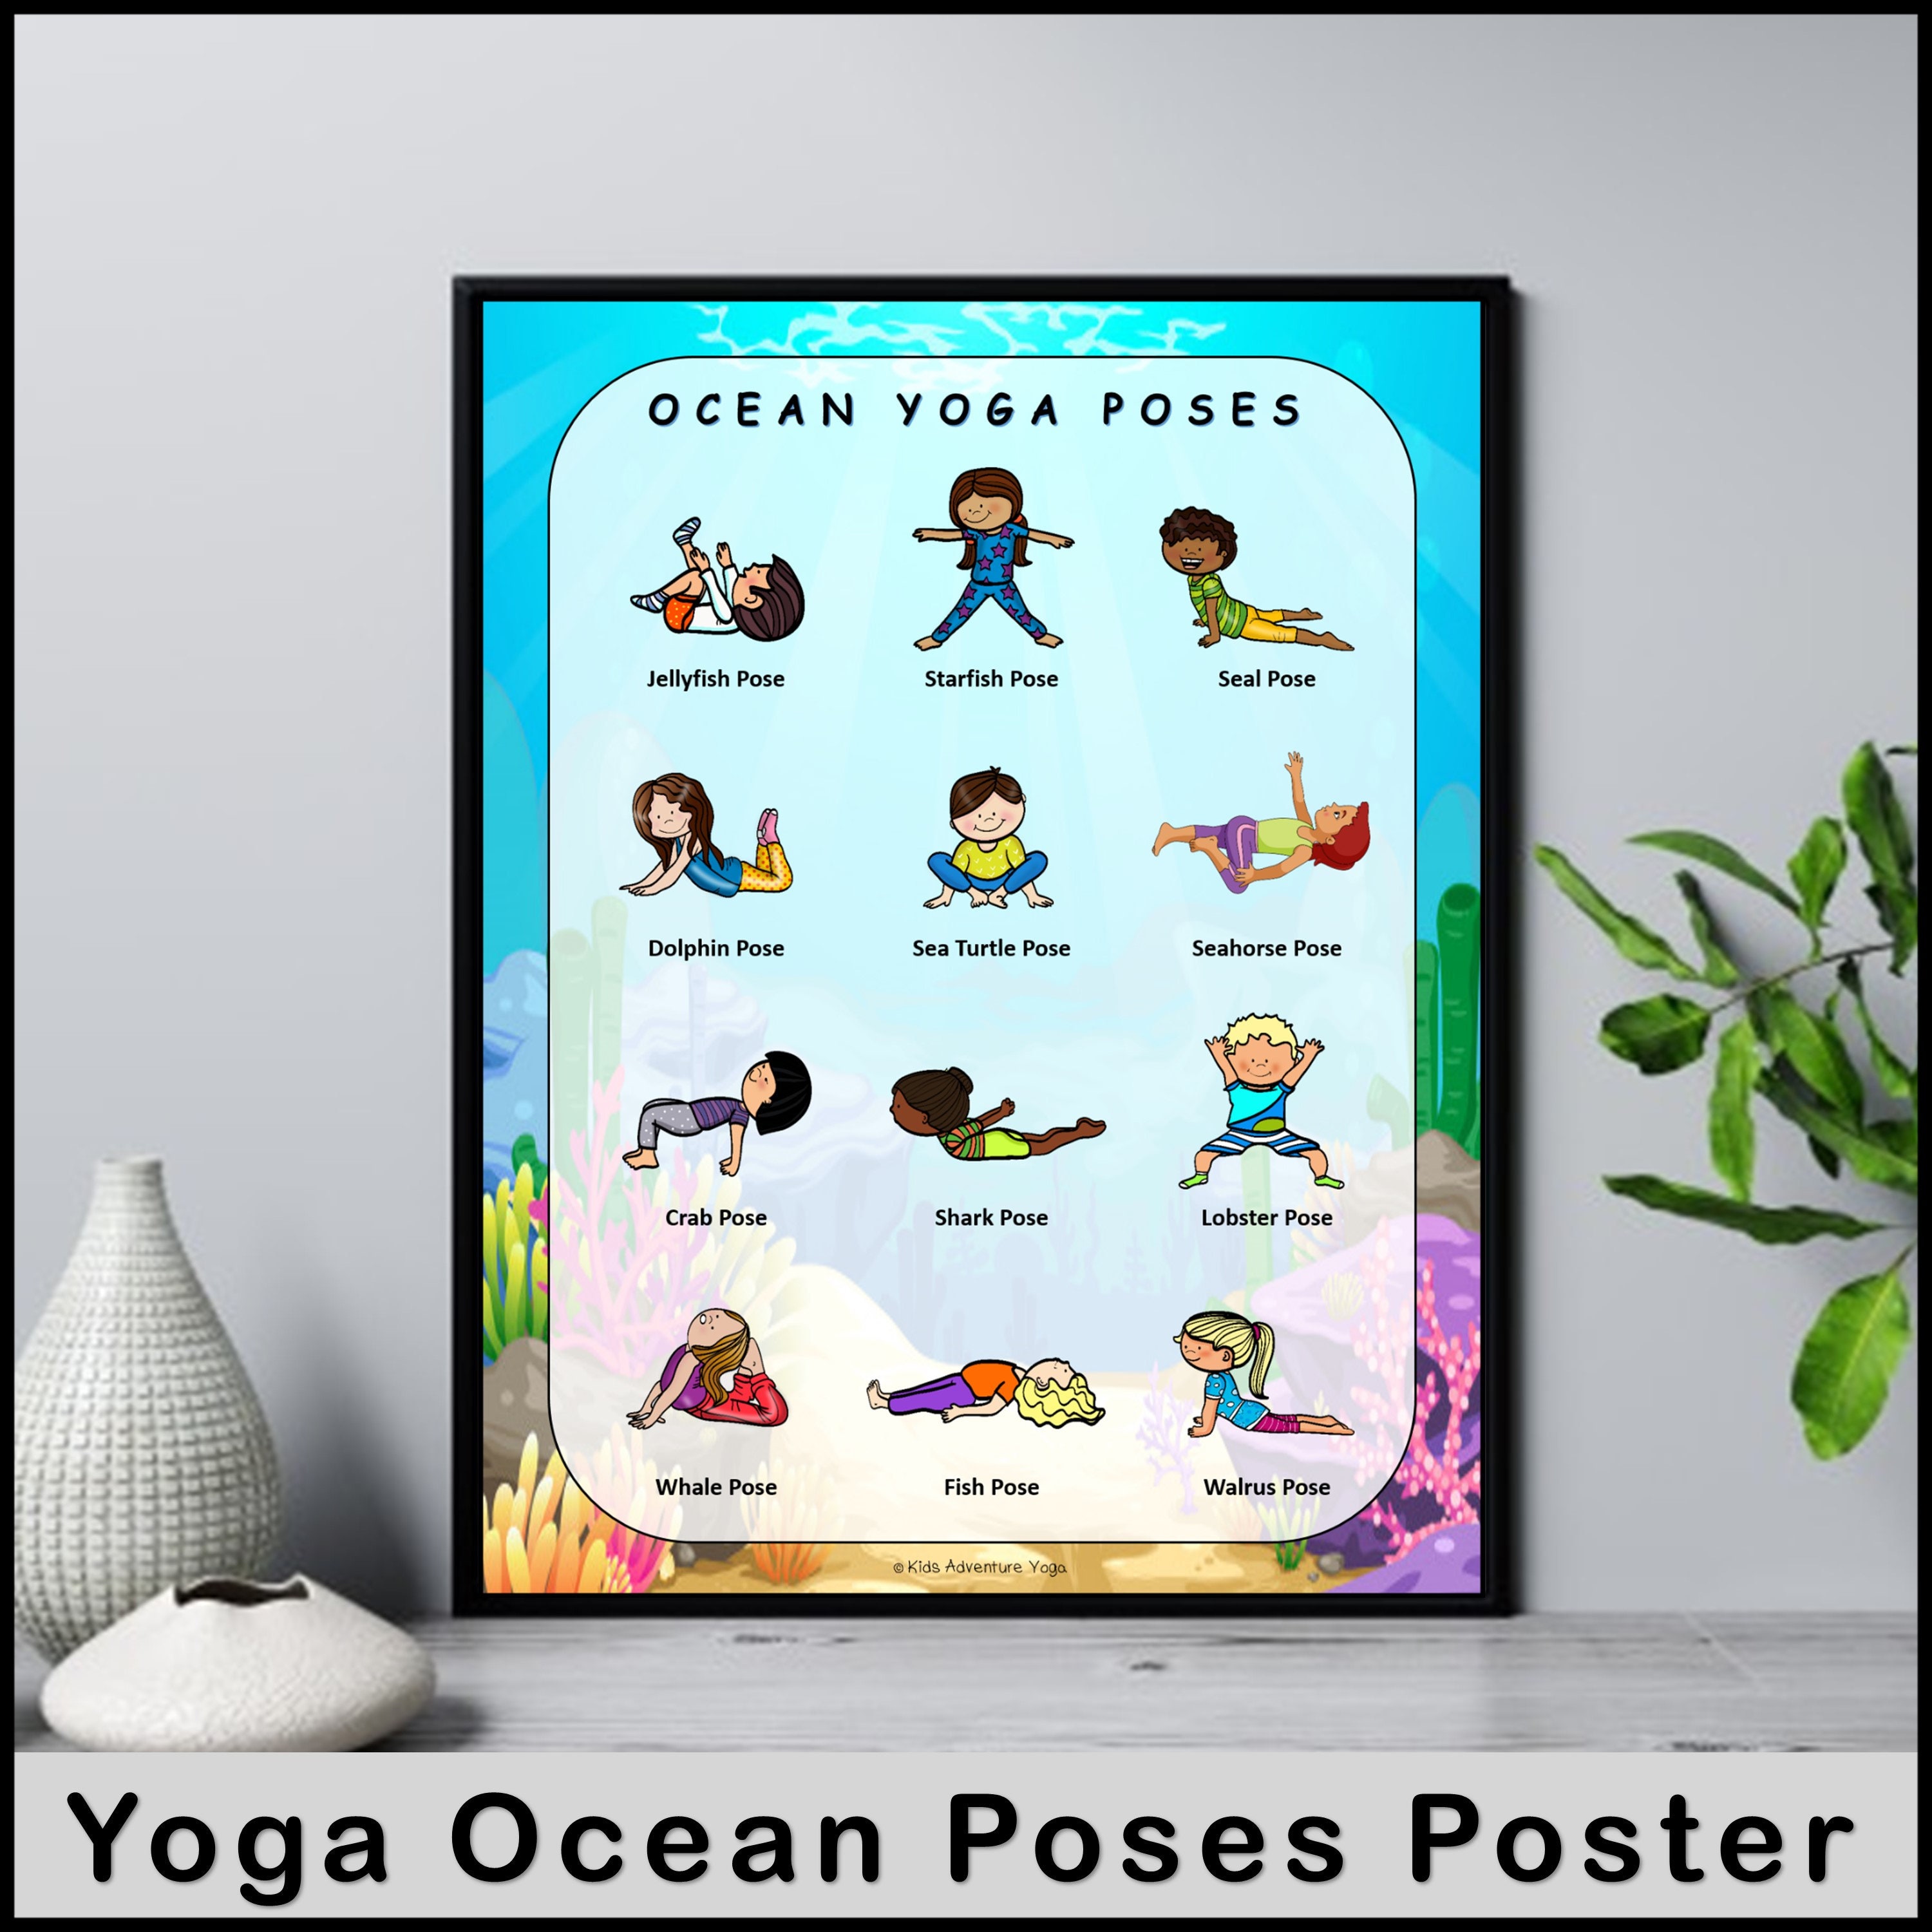 Kids Yoga Cards – Earth And Ocean